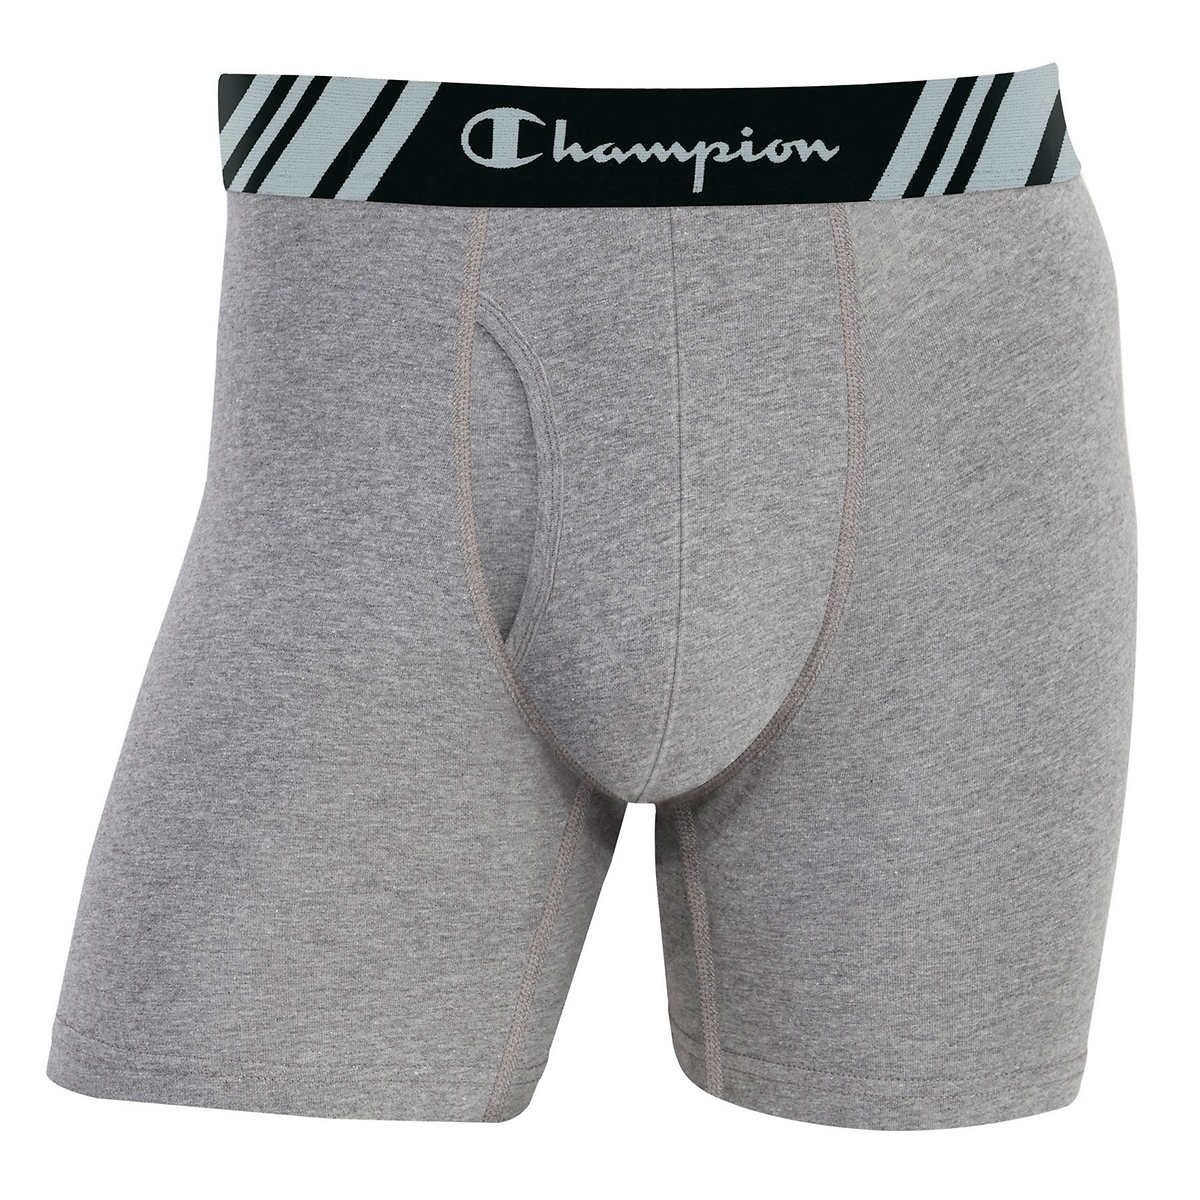 Champion Men's Boxer Brief, X-Large (Pack Of 5)